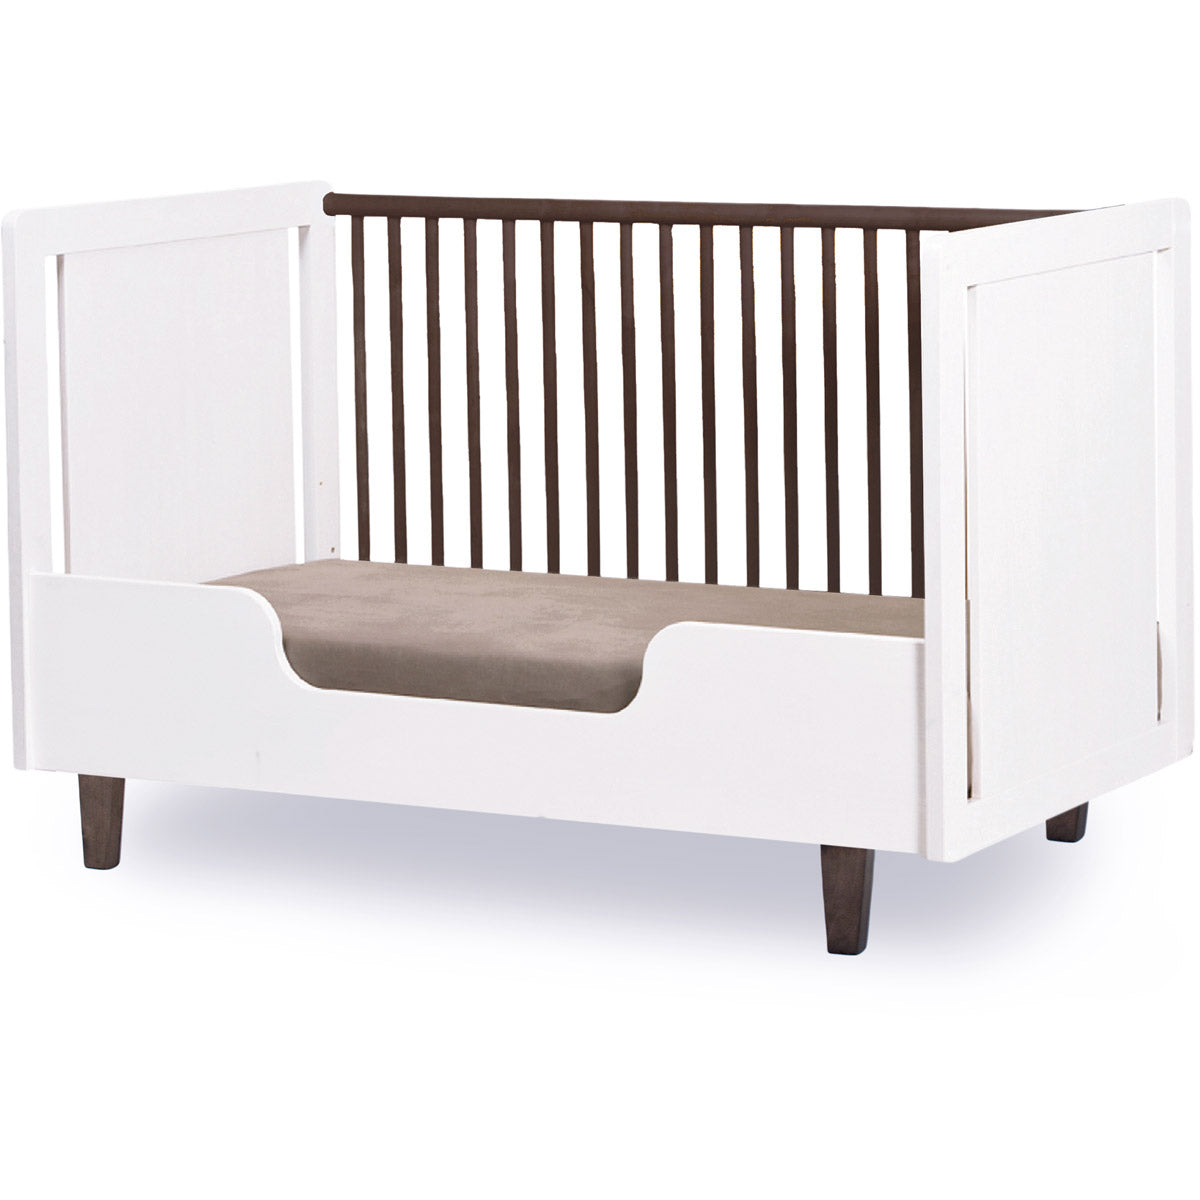 Oeuf Rhea Toddler Bed Conversion Kit Cribs